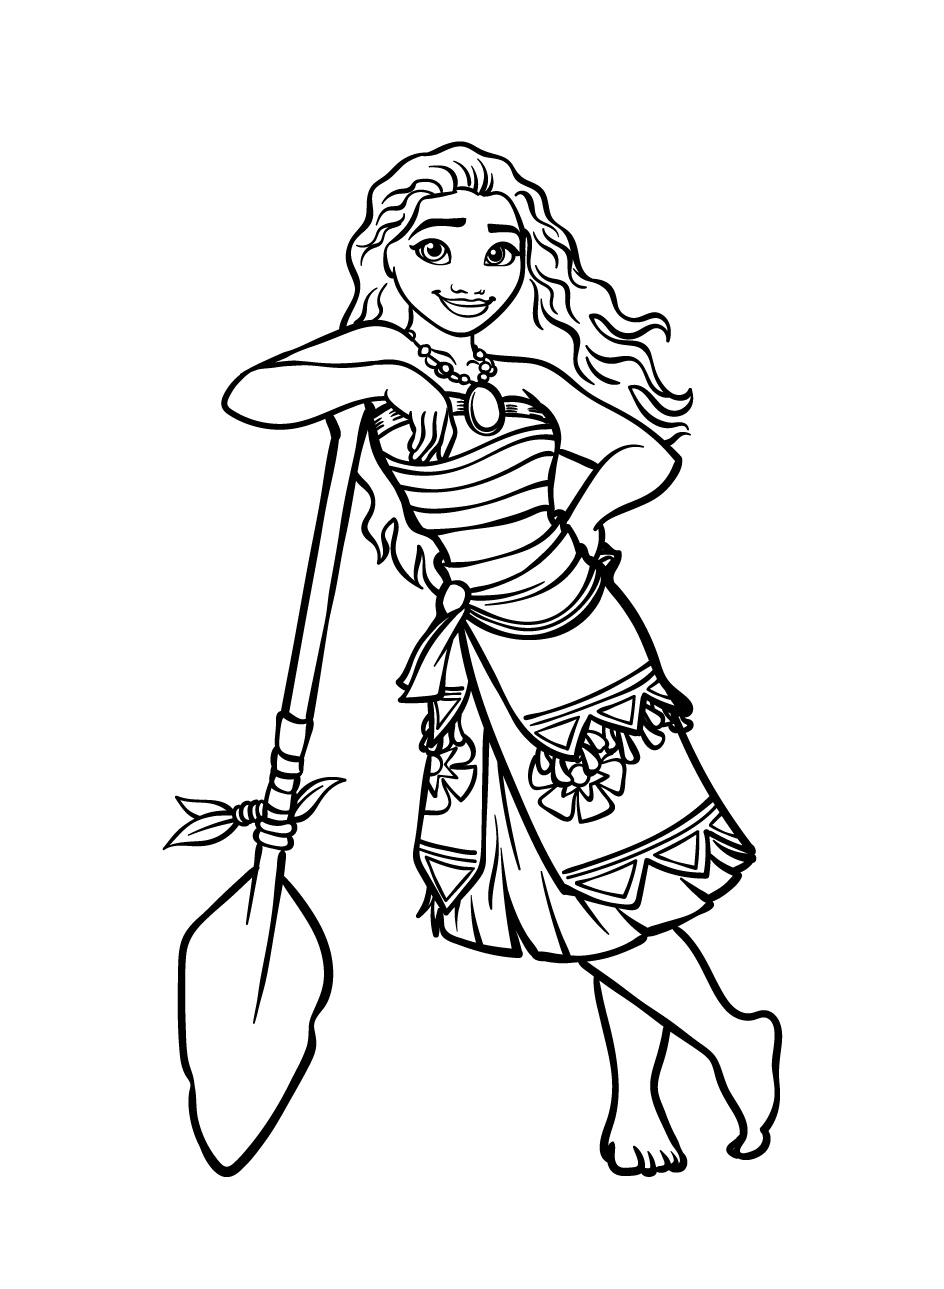 Moana coloring pages by coloringpageswk on